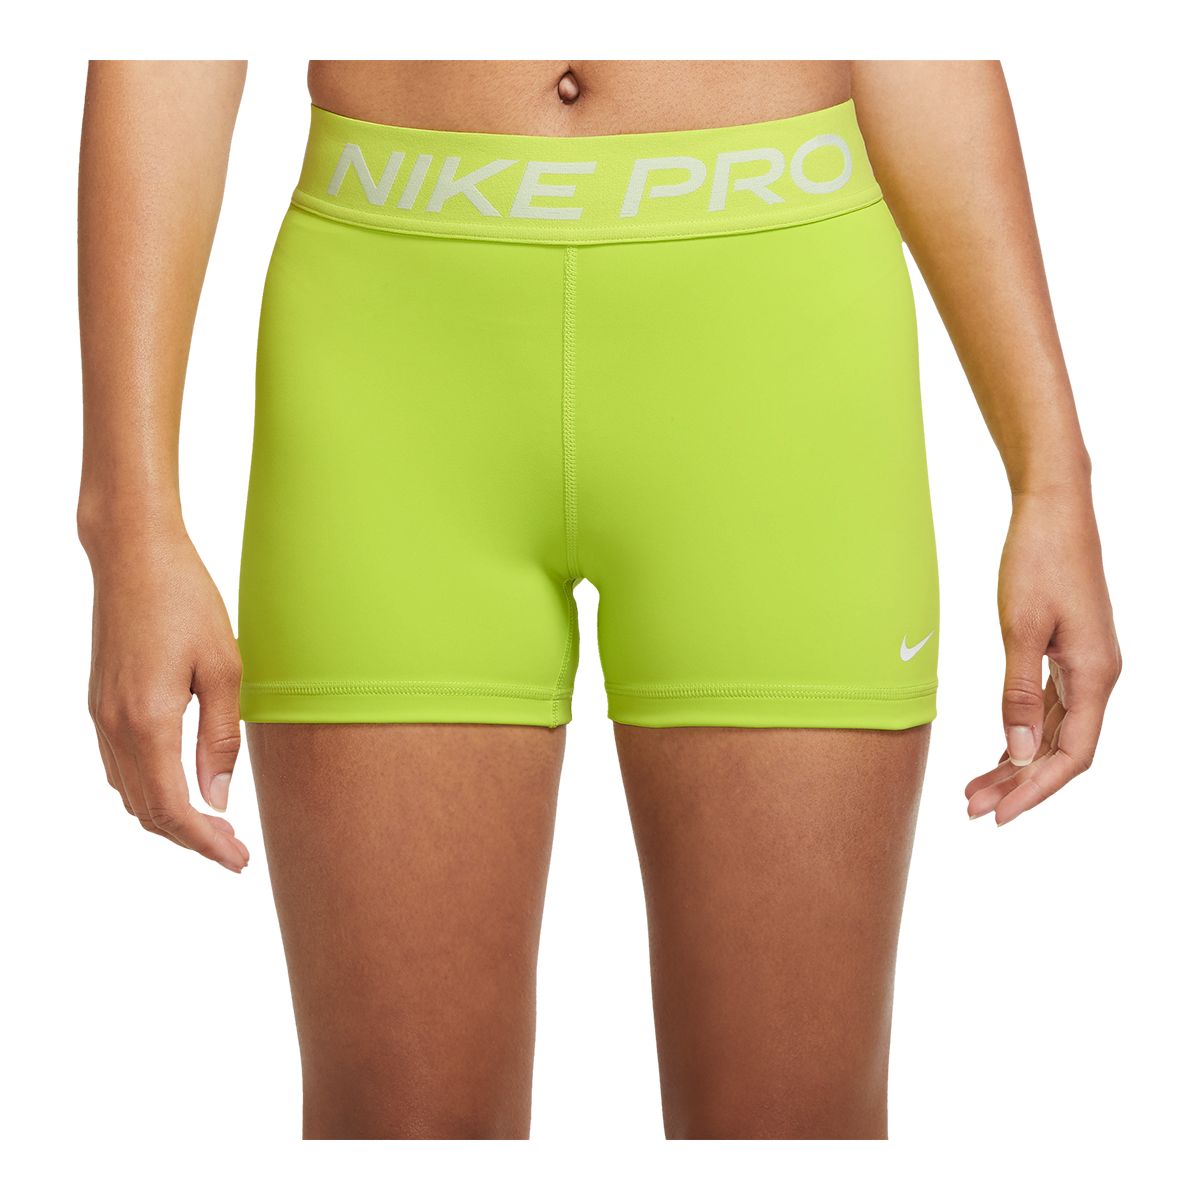 Nike Pro Shorts, Shop The Largest Collection